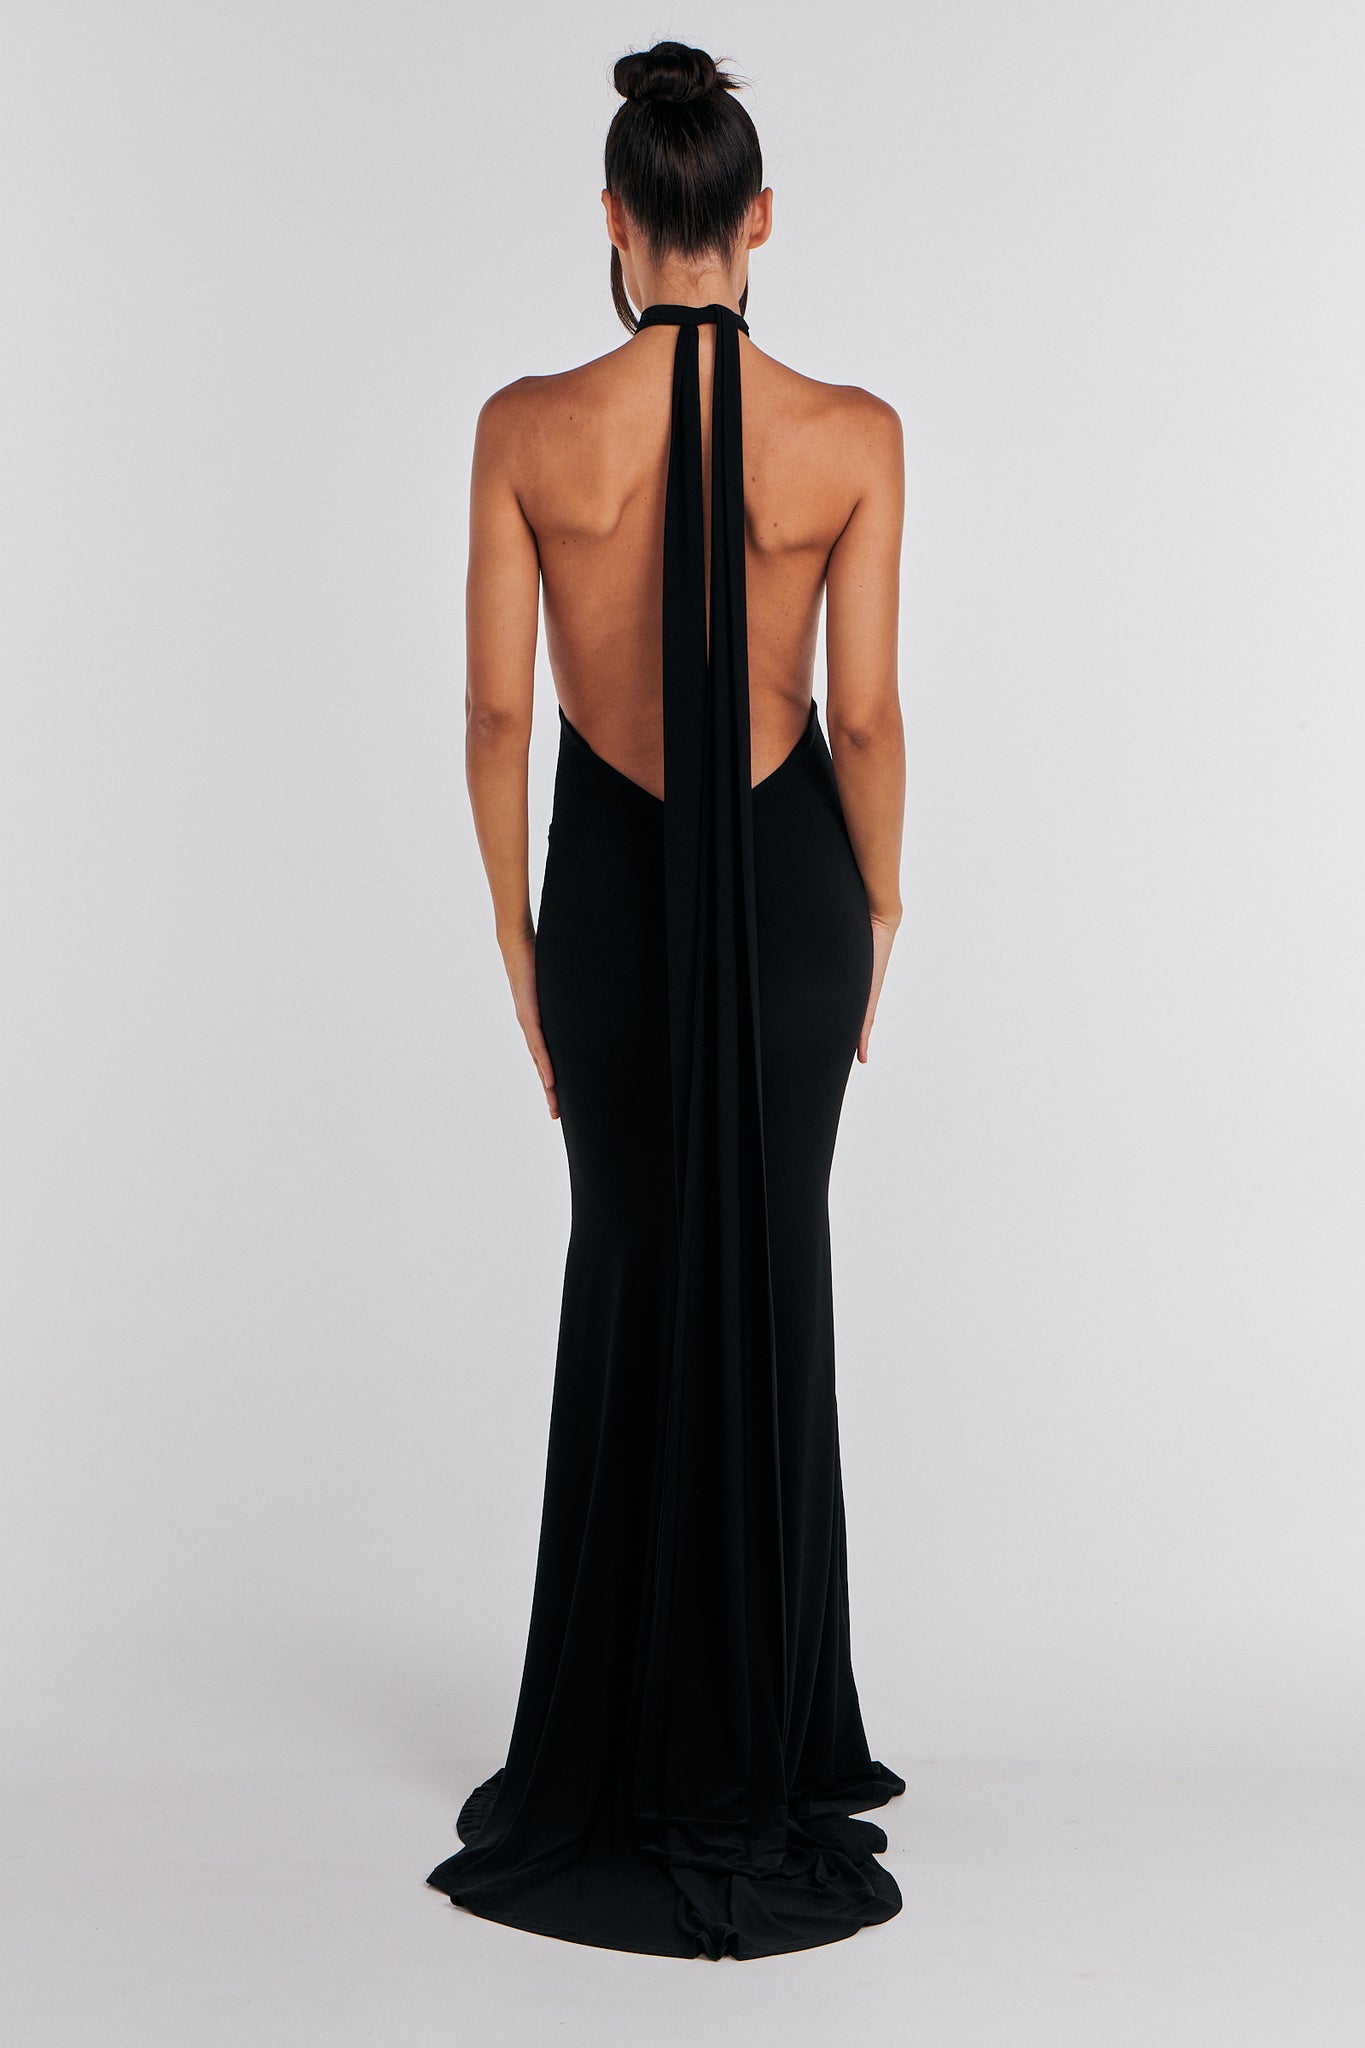 MÉLANI The Label LUCIA Black Keyhole Neckline Backless Bridesmaid Formal Gown